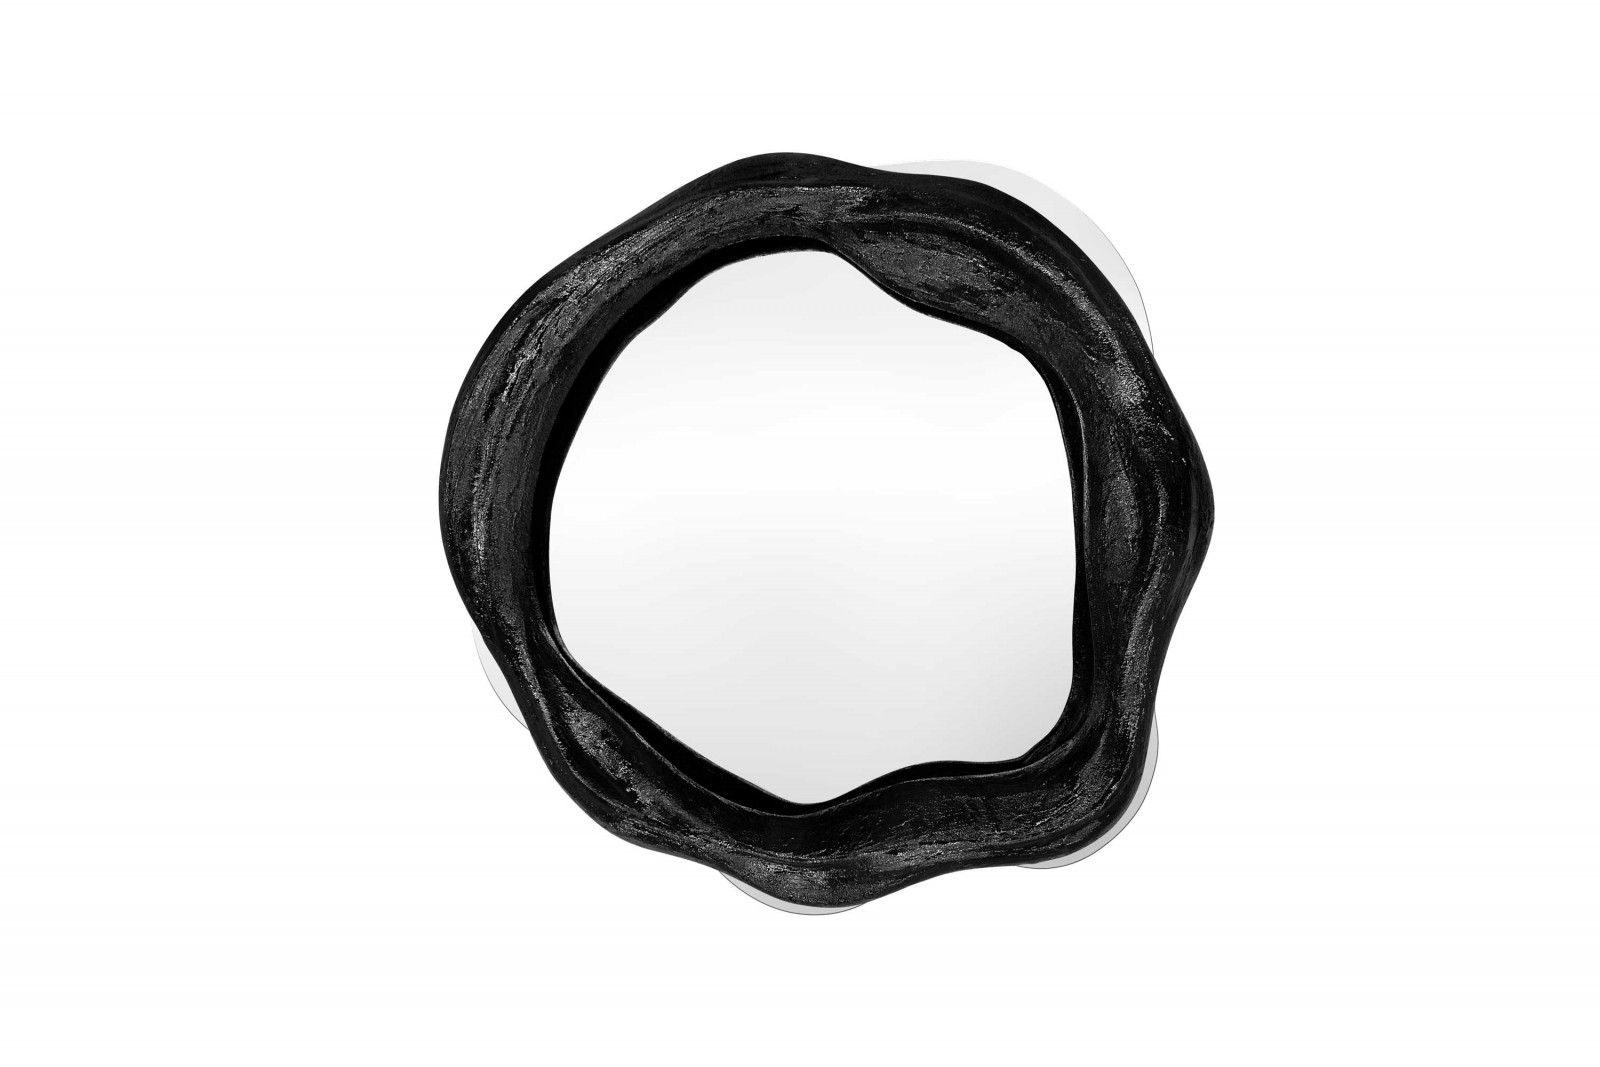 mirror-exclusive-sculptural-luxurious-organic-black-twisted-small-karpa-1-2401-1600-1400-100